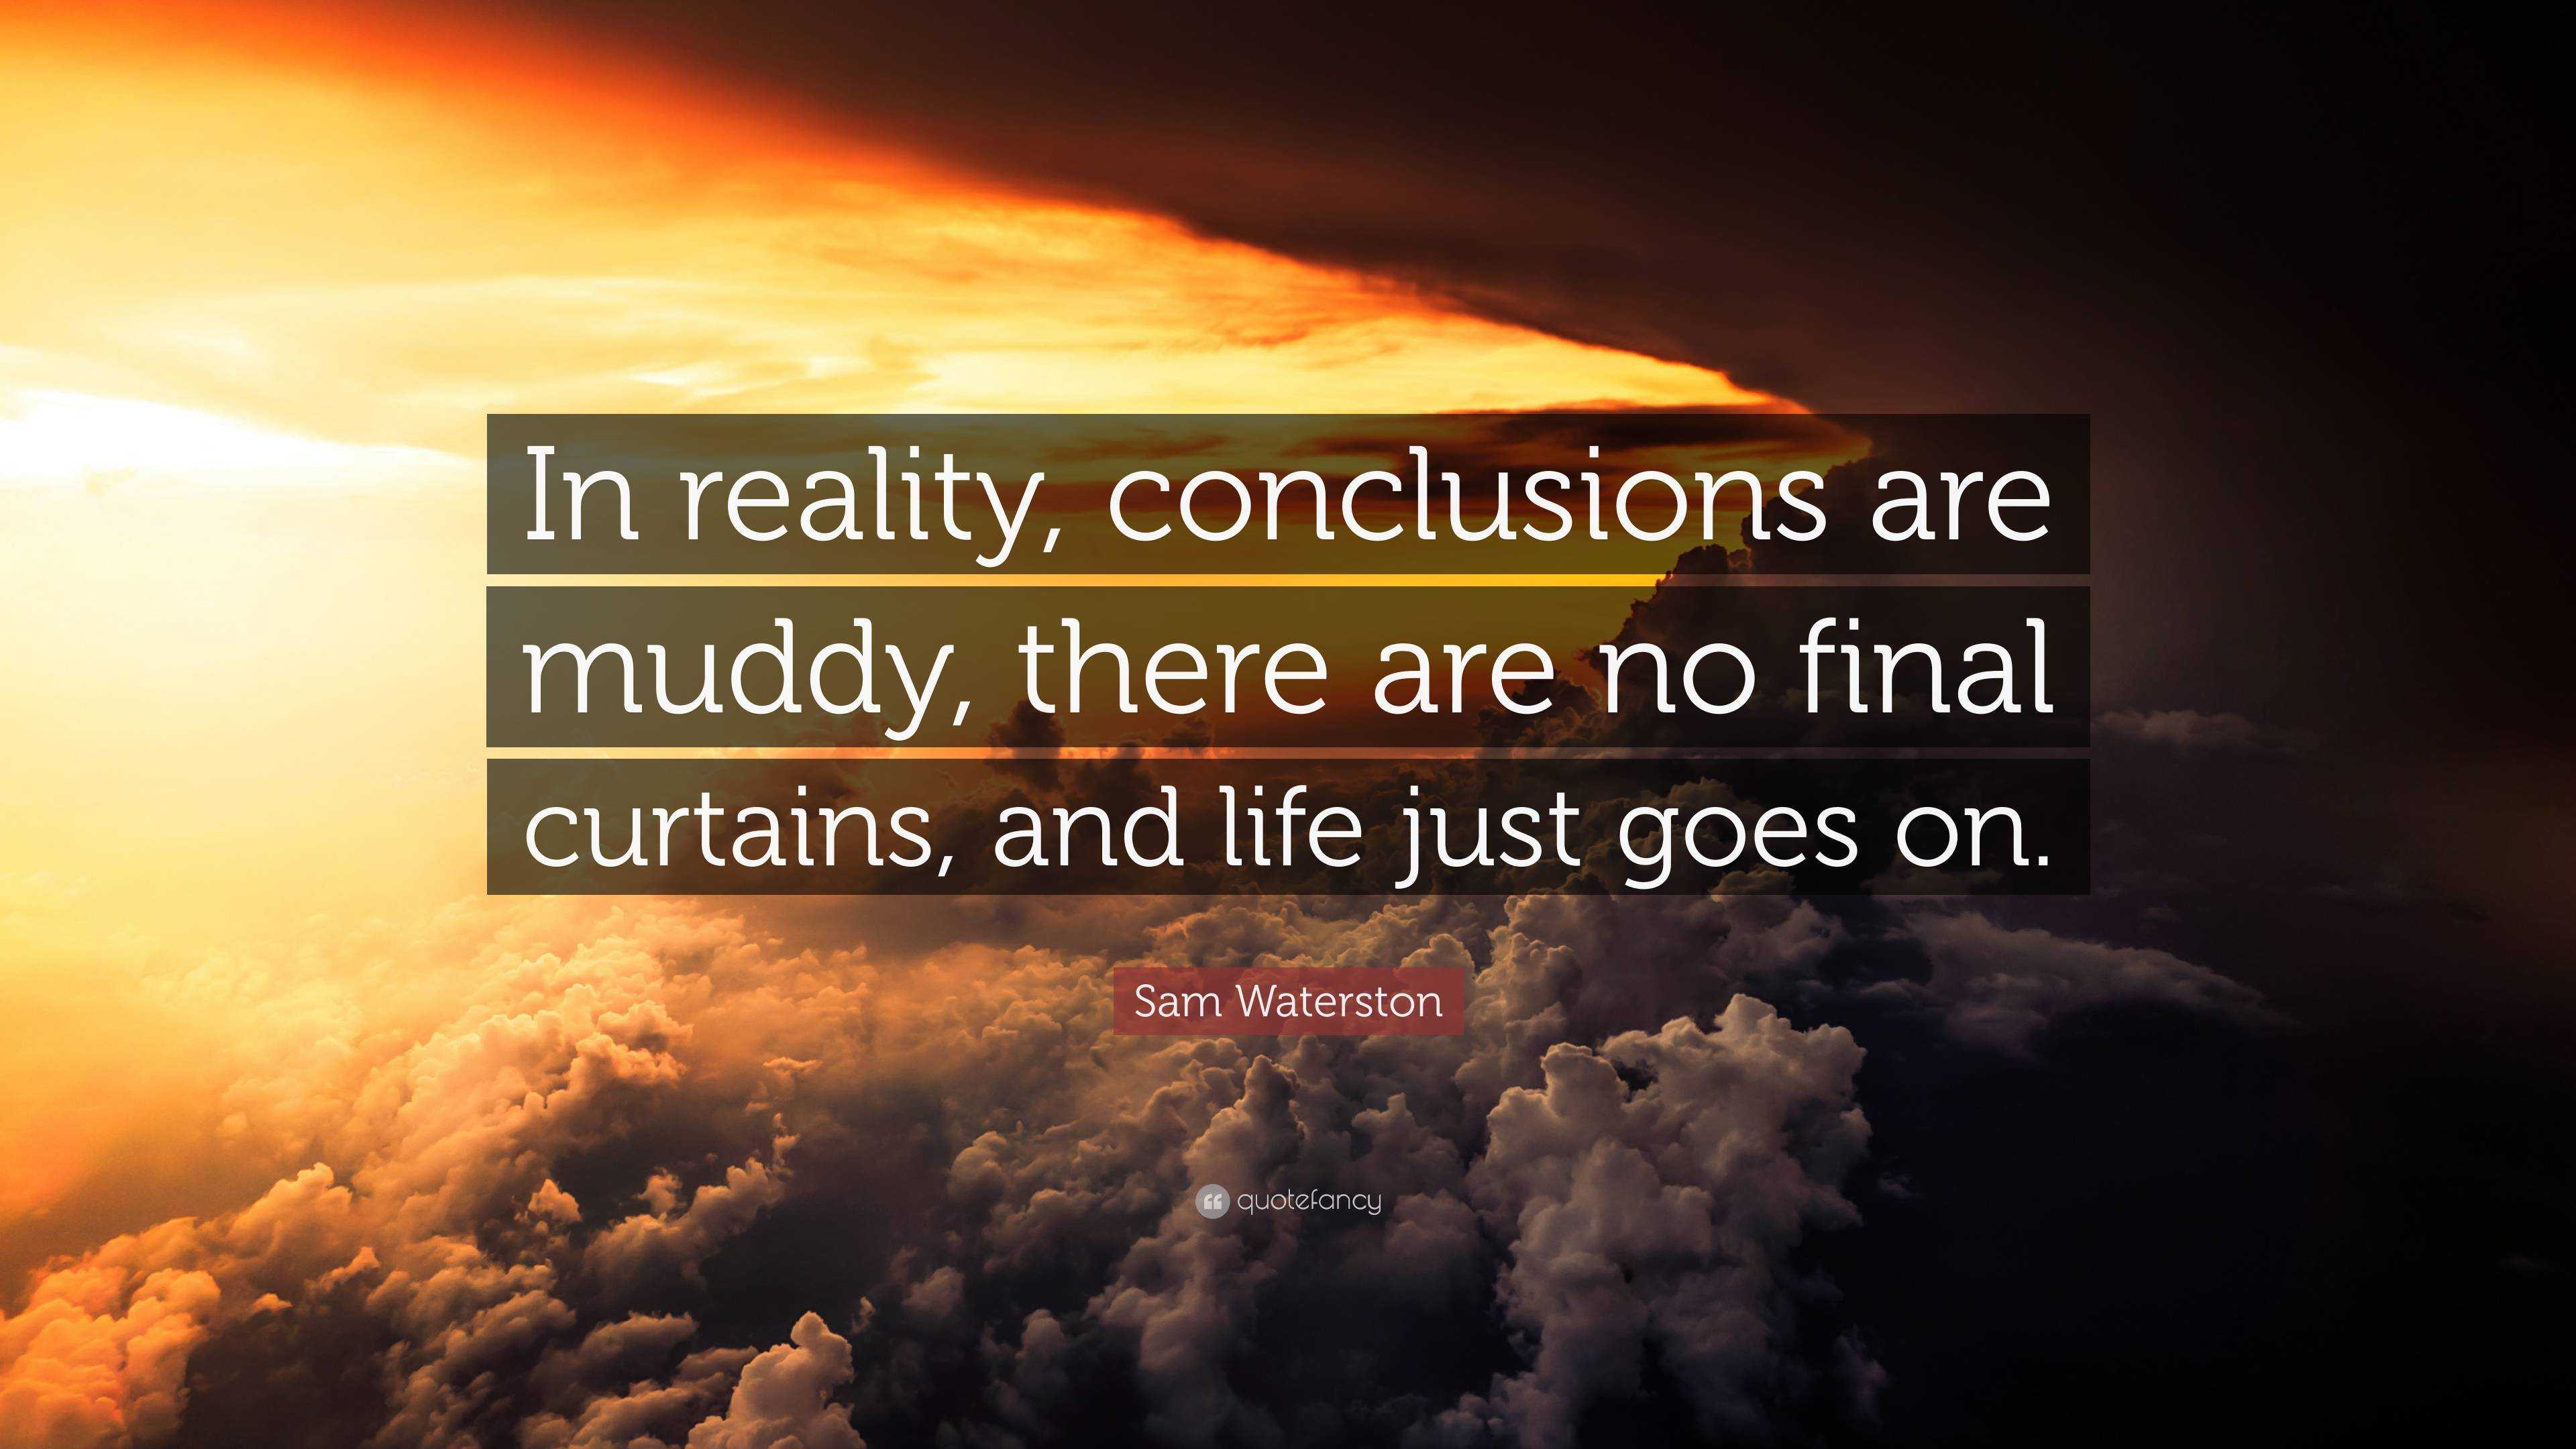 Sam Waterston Quote: “In reality, conclusions are muddy, there are no ...